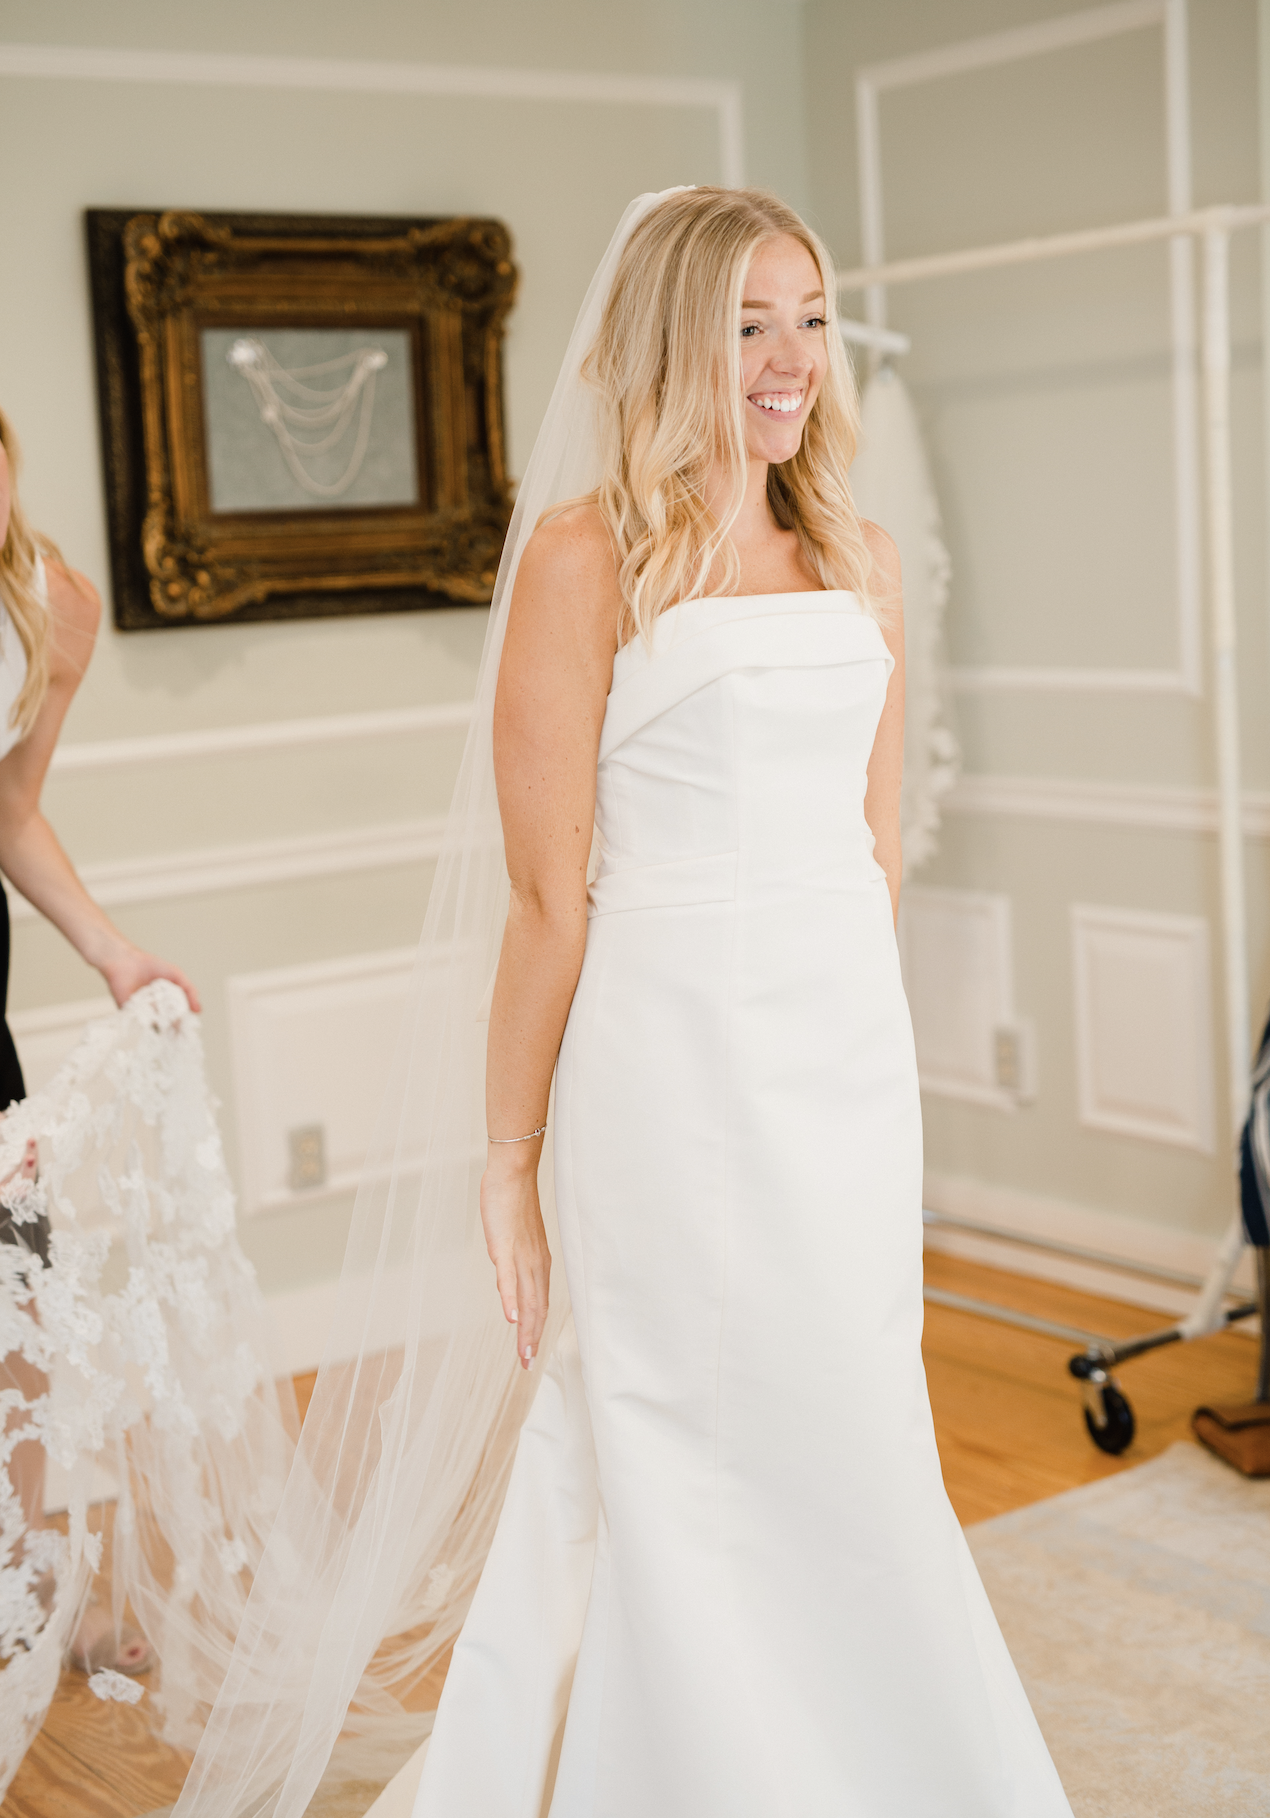 5 Wedding Dress Shopping Tips for your First Bridal Appointment. Desktop Image